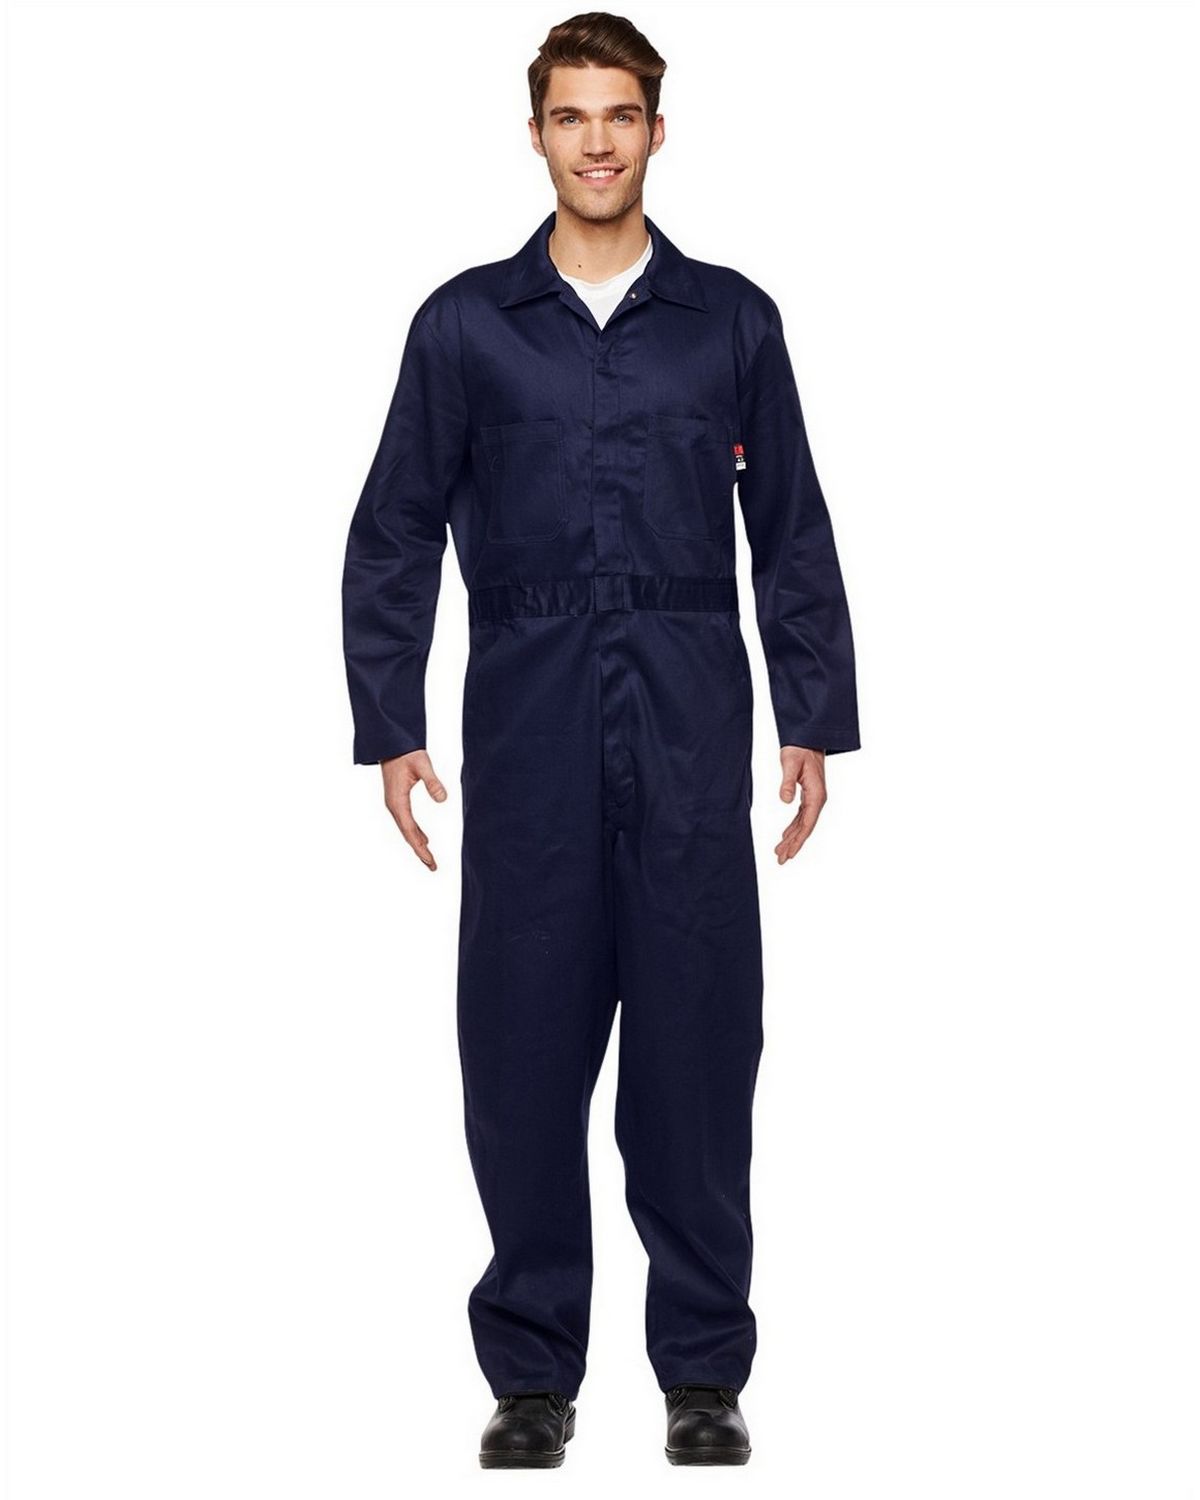 Walls Men's Flame Resistant Contractor Coverall 2.0 